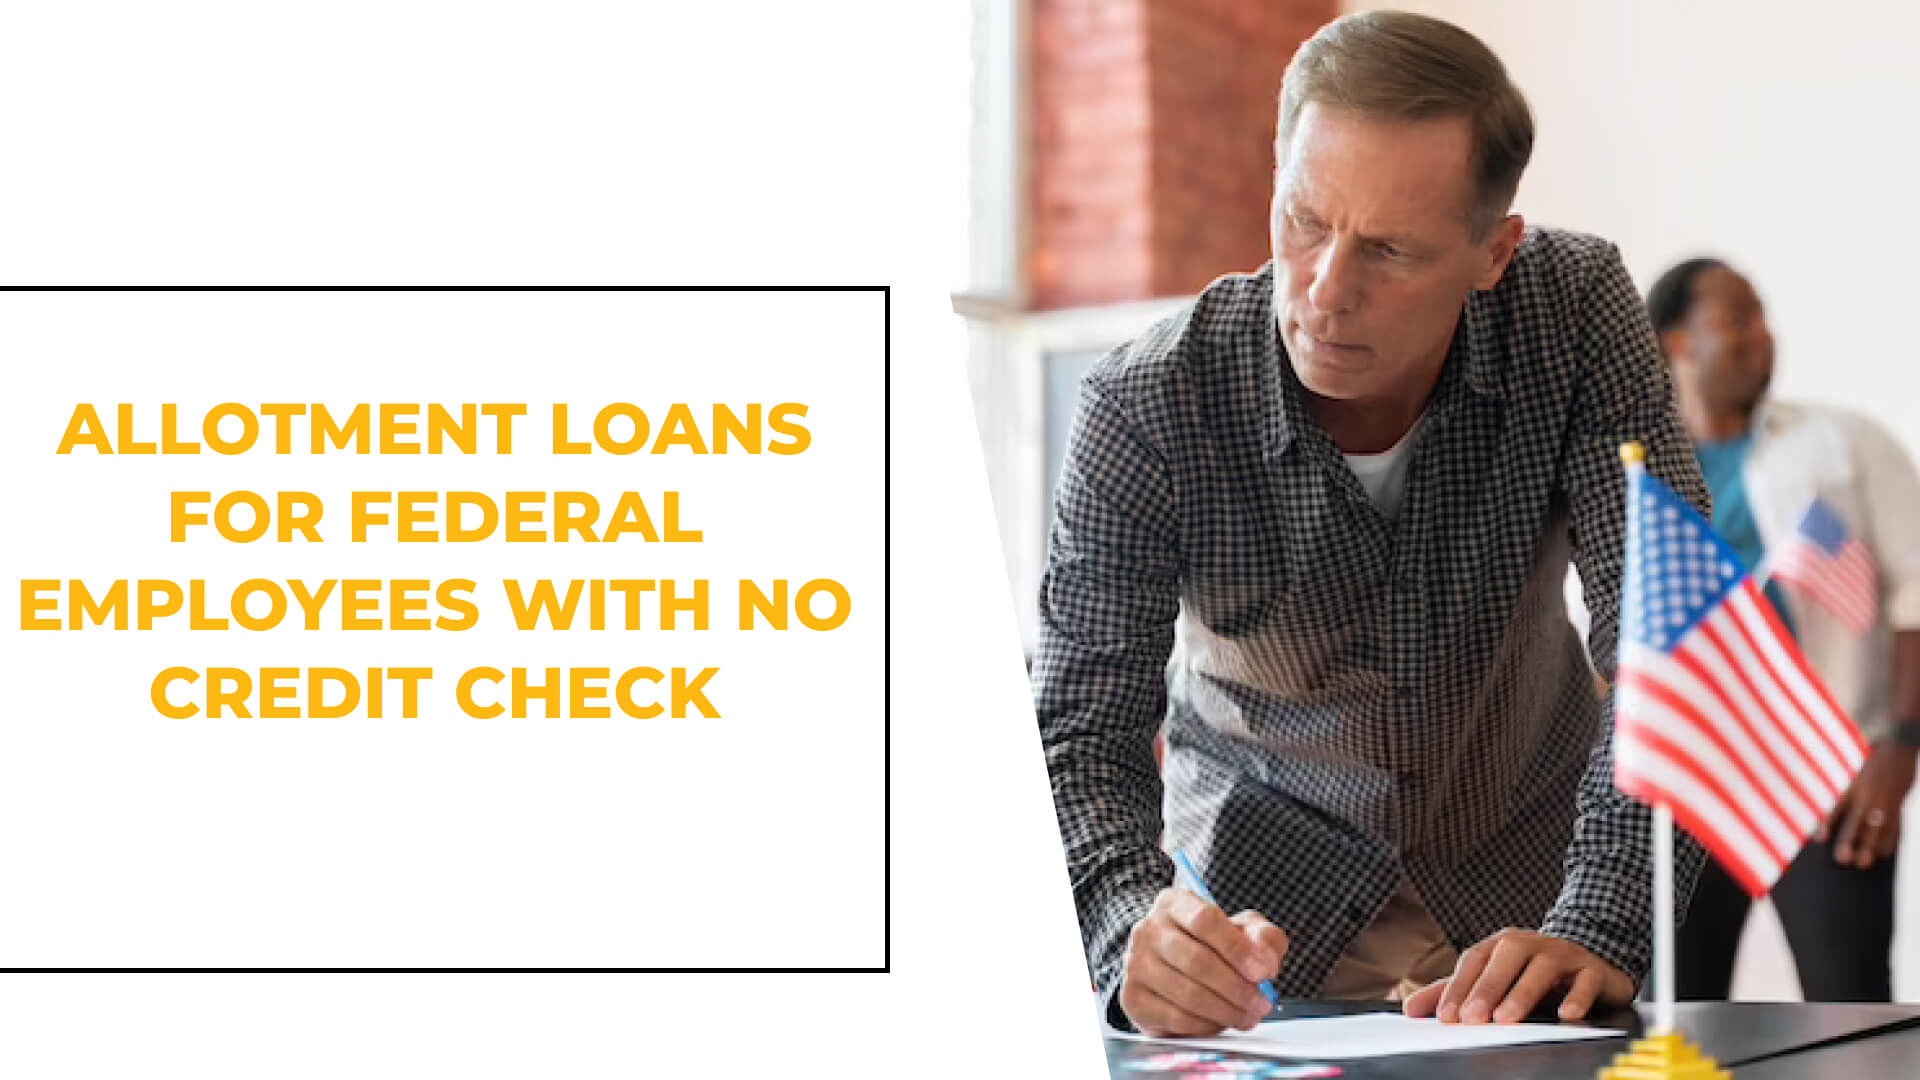 Allotment Loans for Federal Employees with no Credit Check